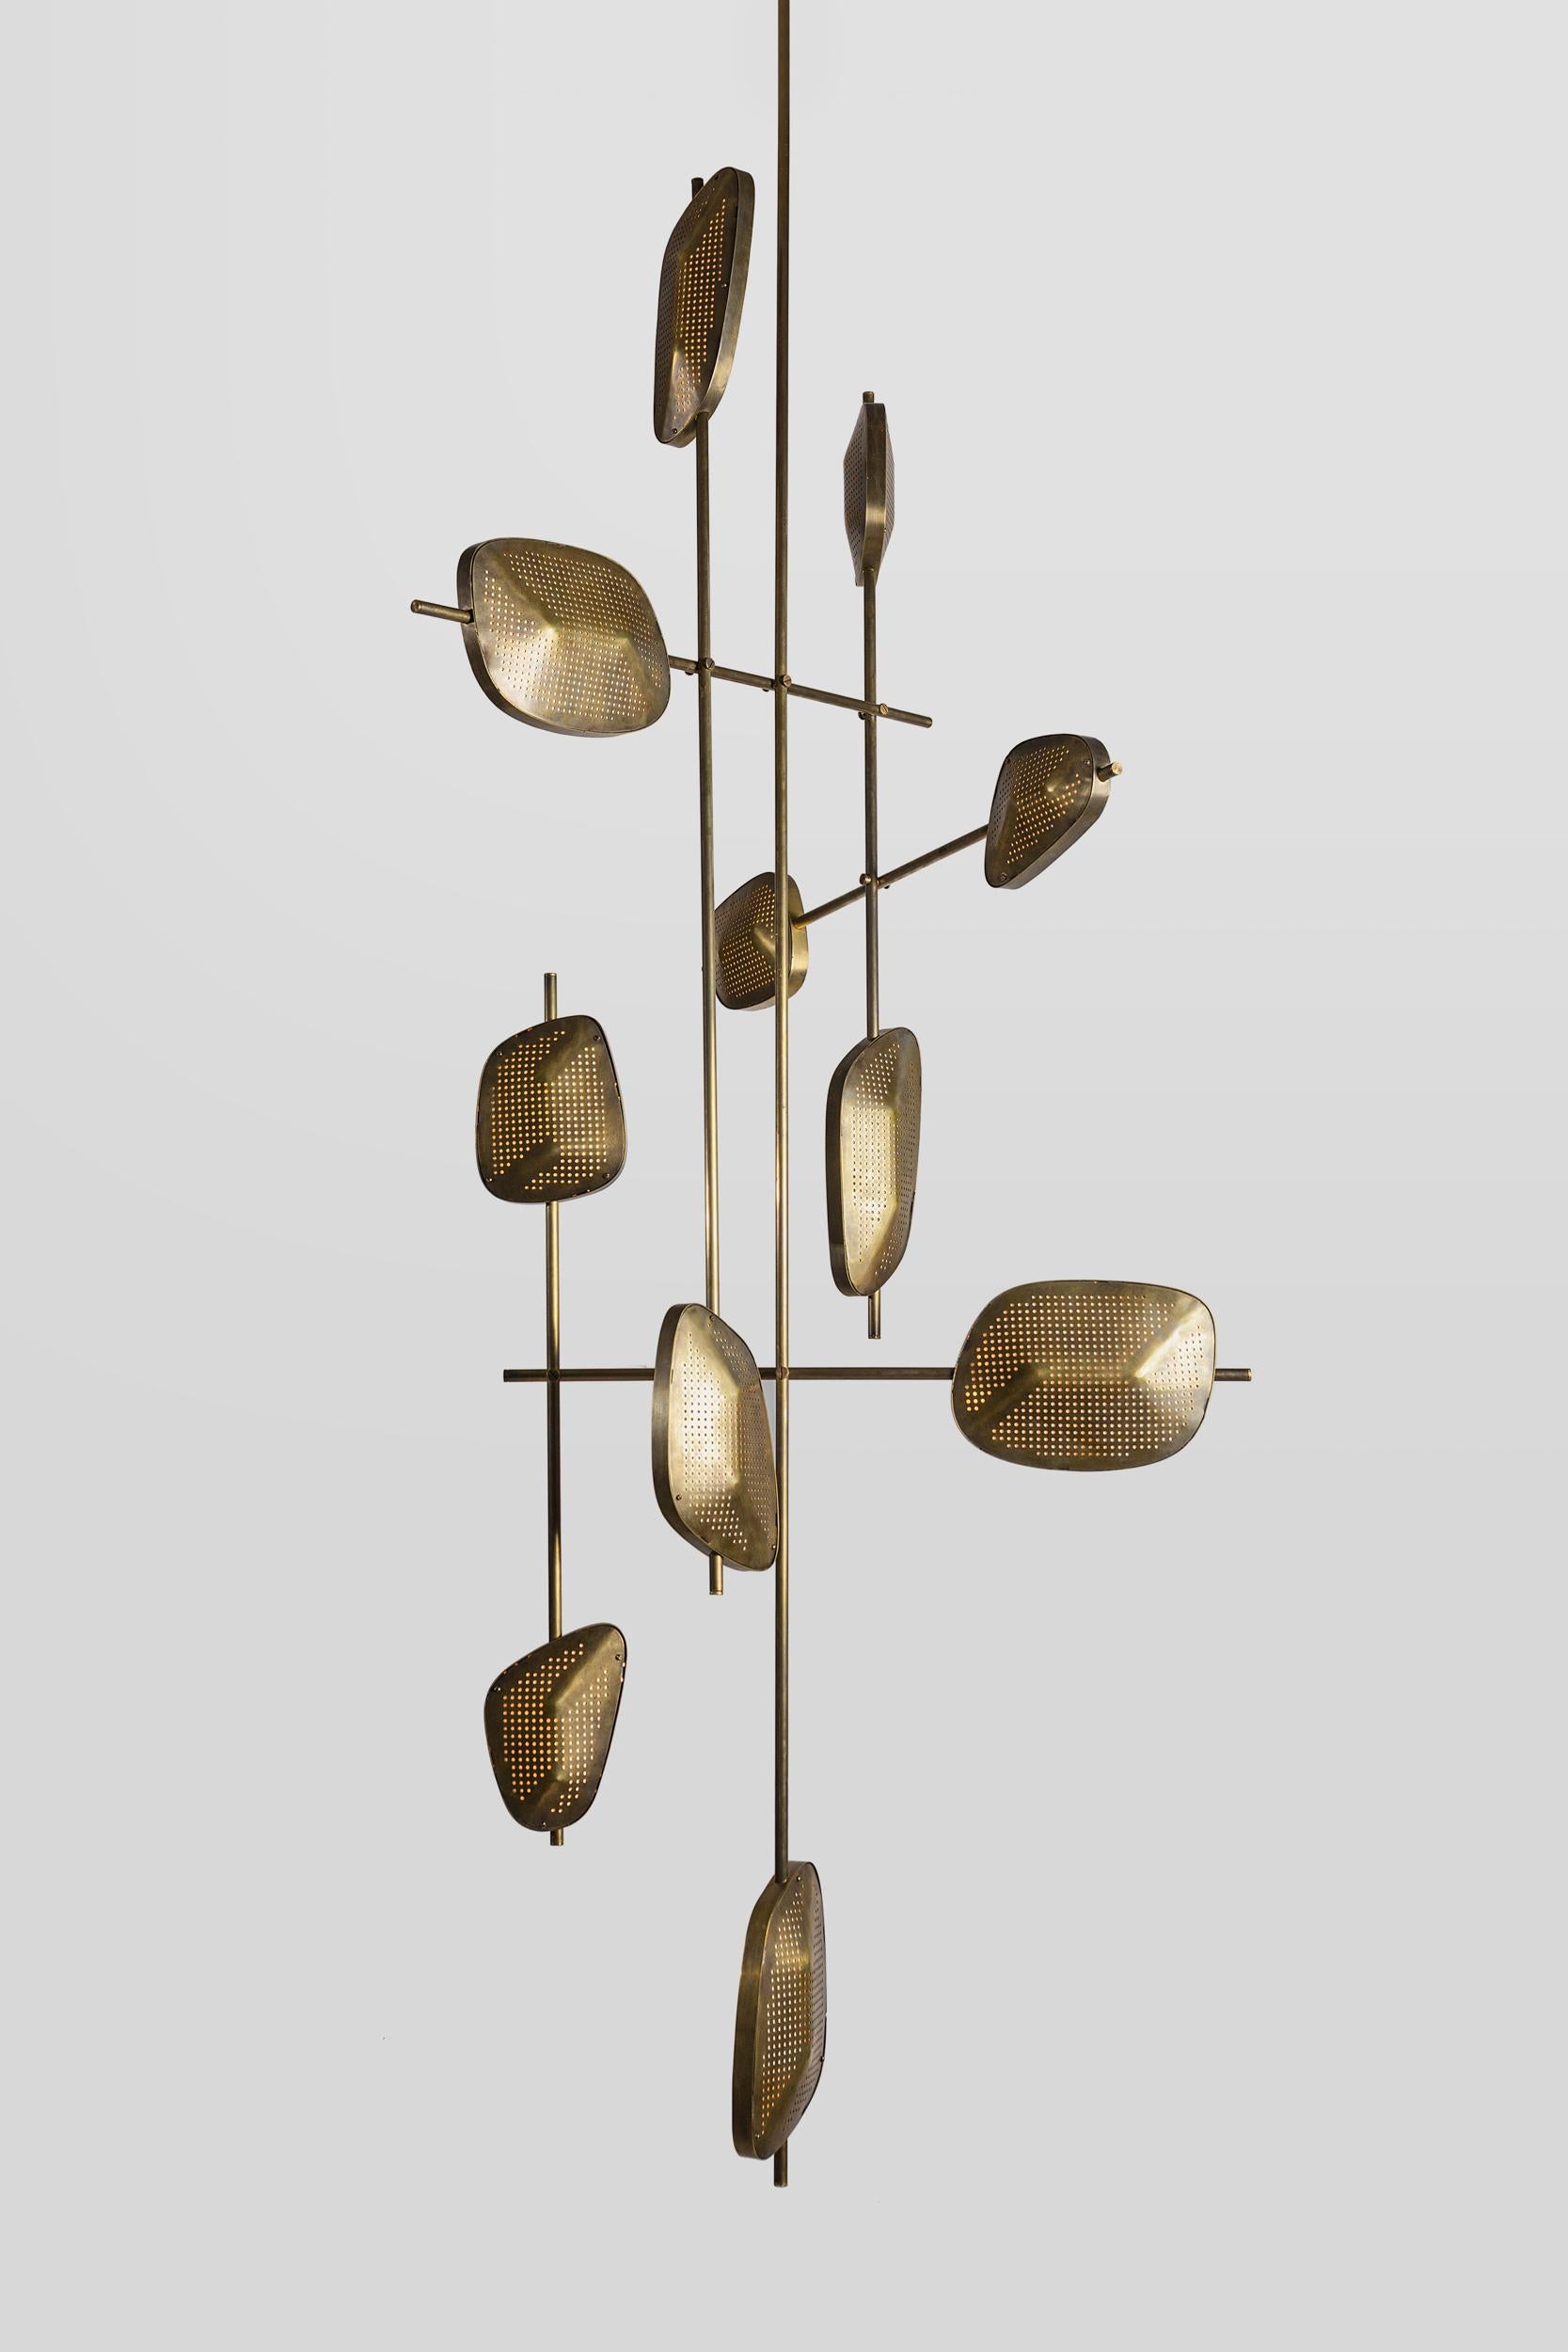 Candelera 03 hanging lamp by Federico Stefanovich
Dimensions: Ø90 x H 190 cm
Material: Structure and volumes made of brass with an aged and sealed finish. Polypropylene light diffusers. Dimmable LED strips.

Federico Stefanovich presents himself